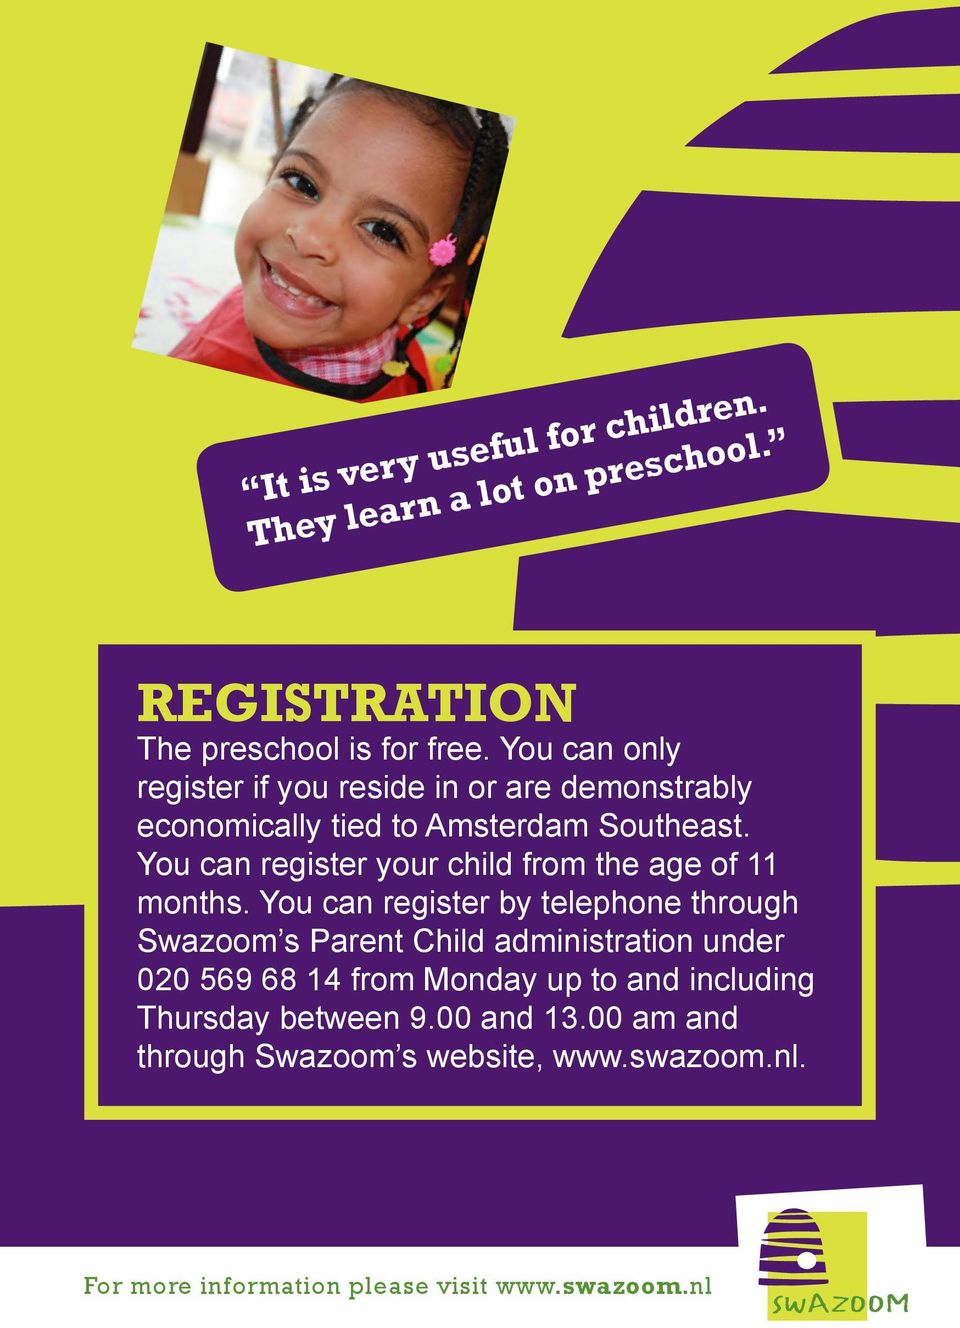 You can register your child from the age of 11 months.